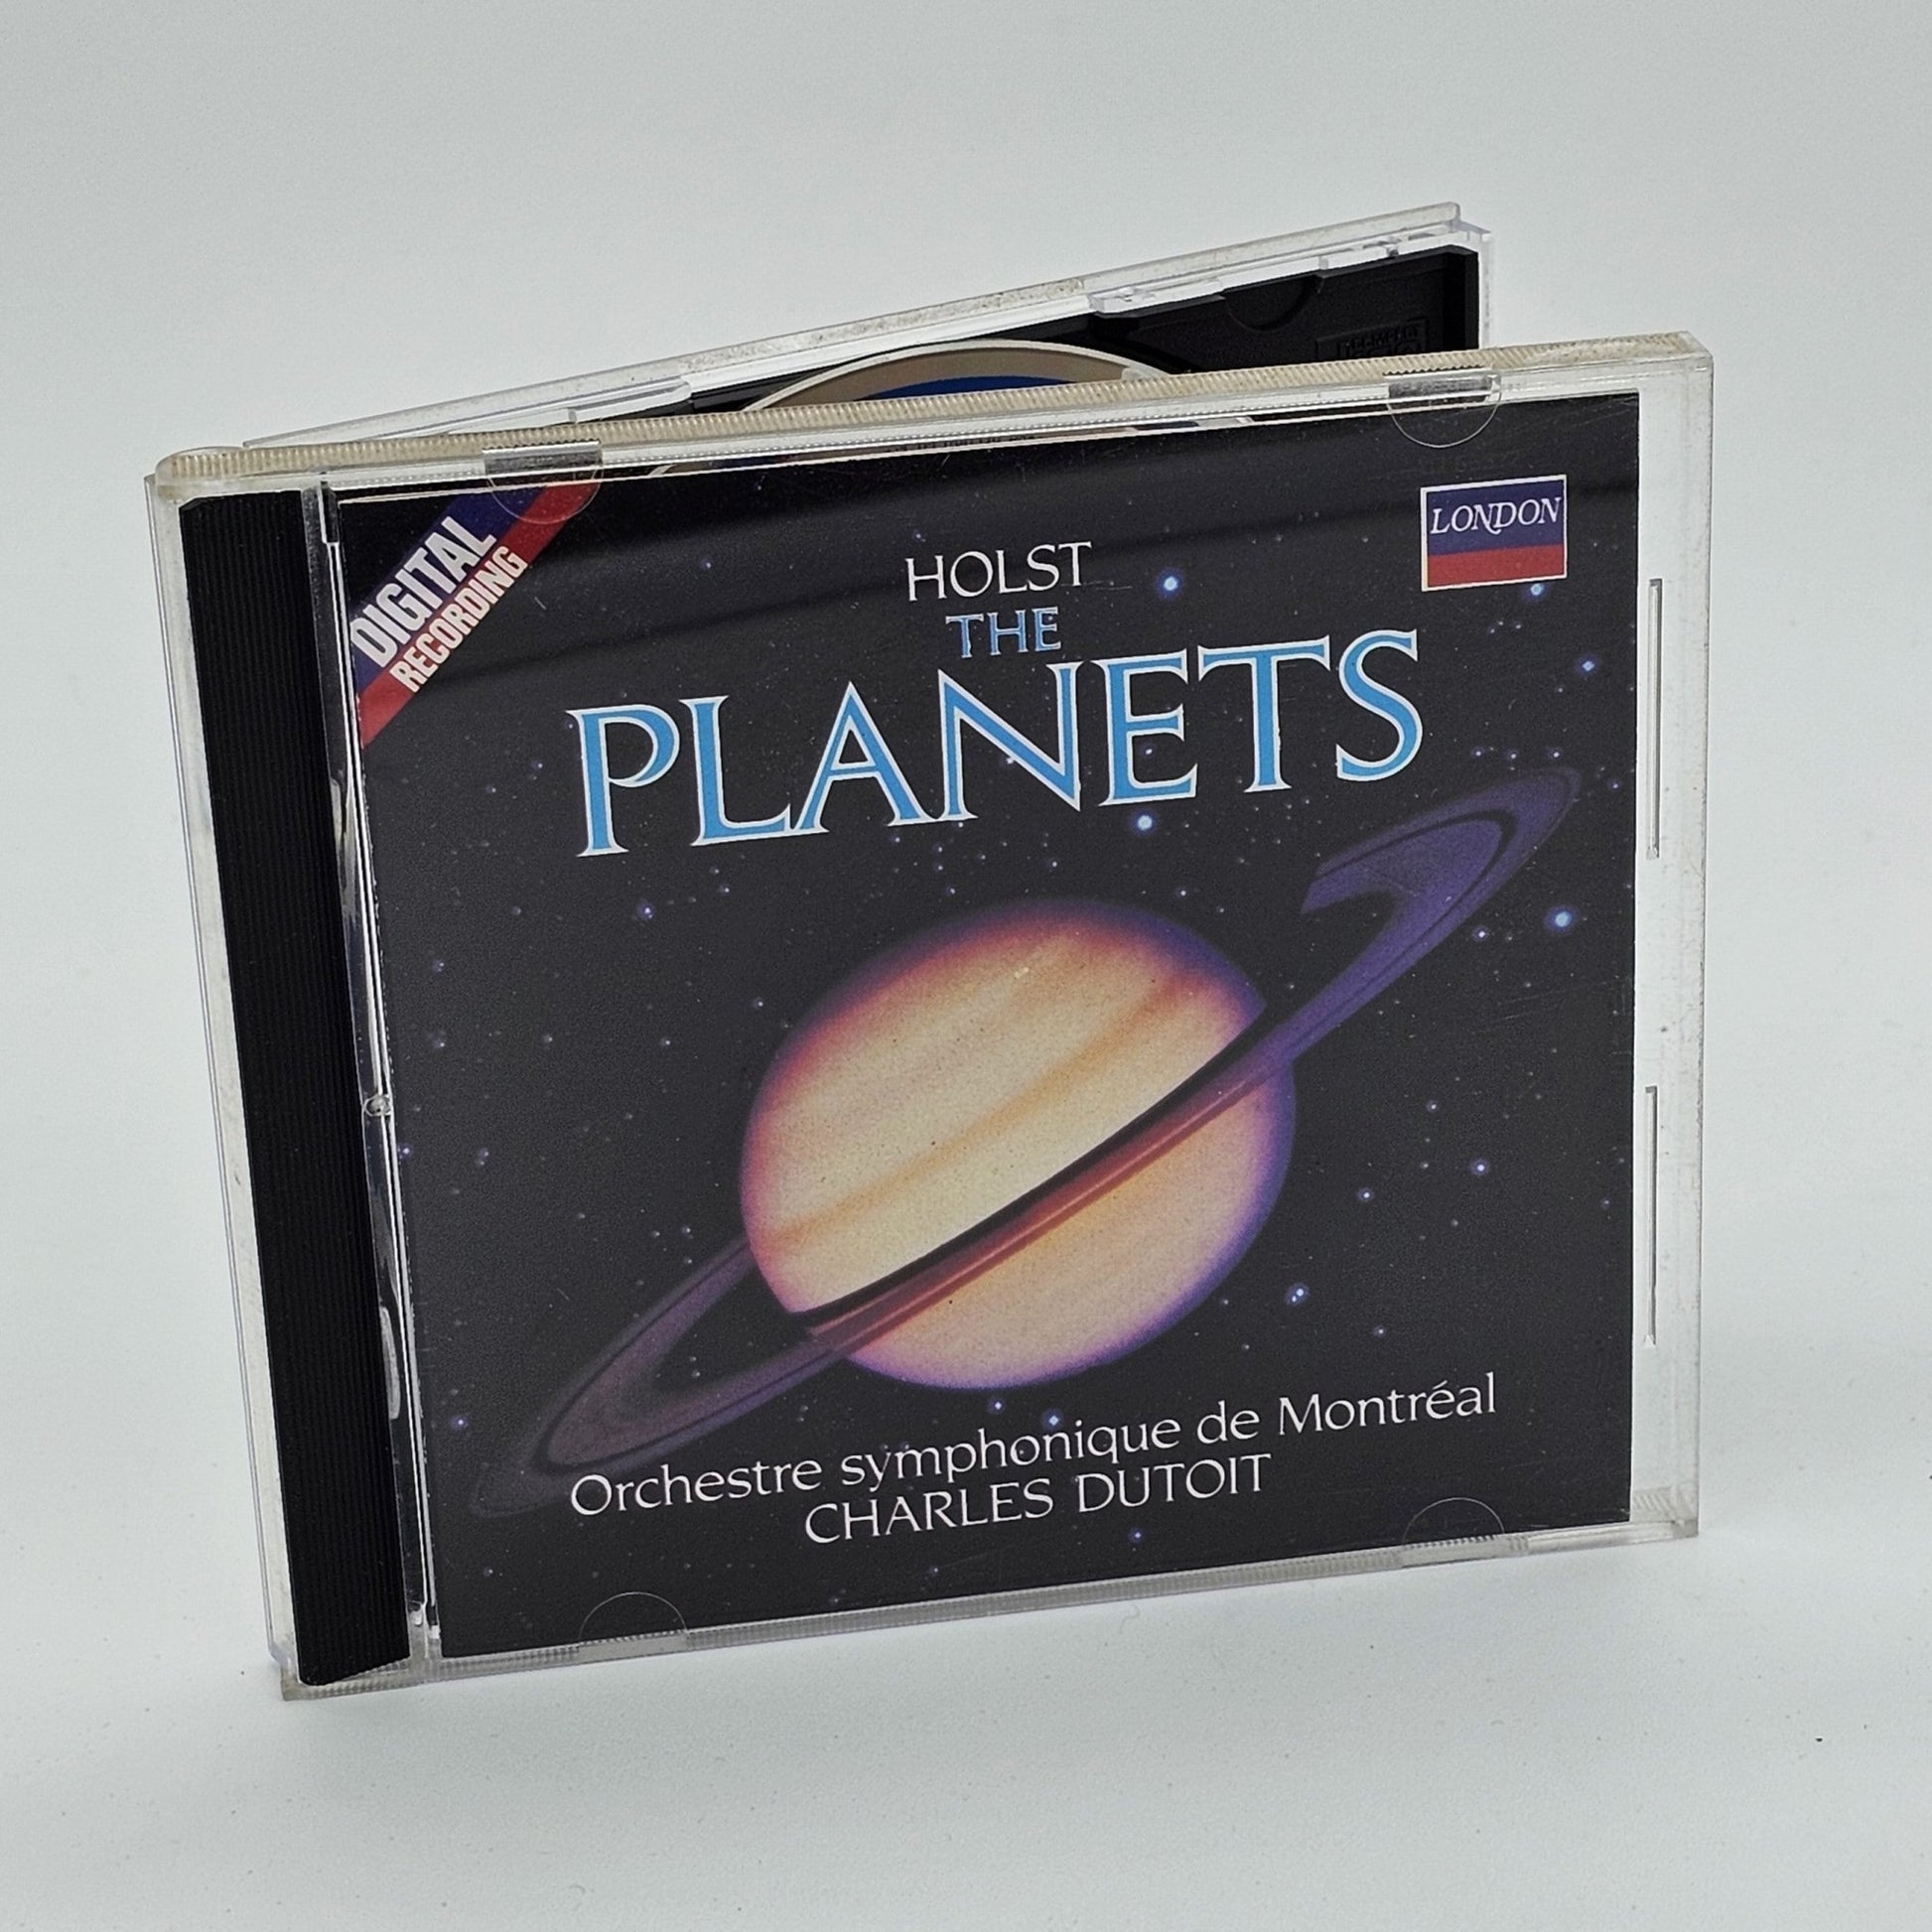 London Records - Charles Dutoit | Holst The Planets | CD - Compact Disc - Steady Bunny Shop